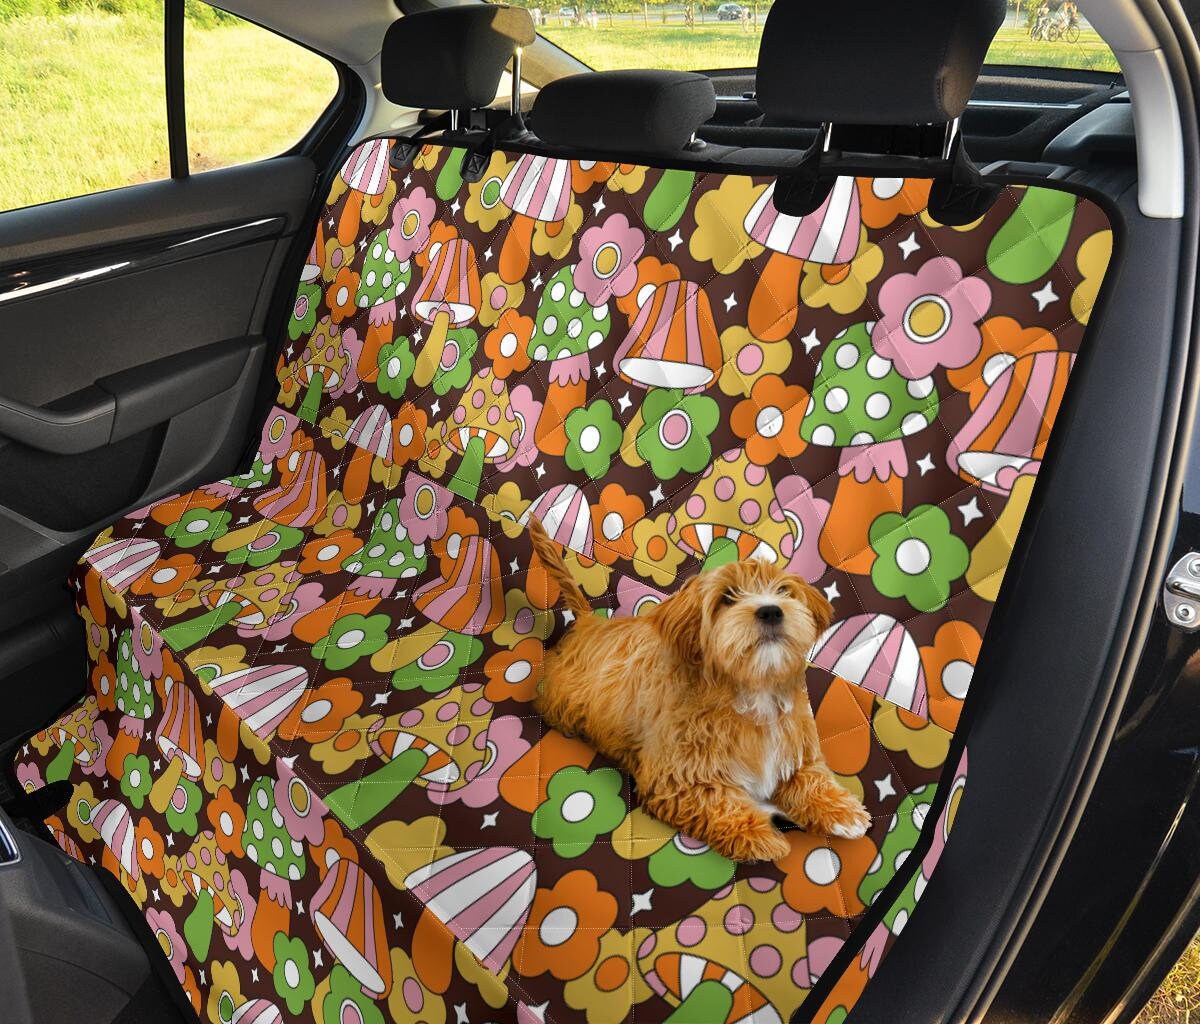 Full Set Car Seat Covers for Vehicle, Seat Covers for Car, Boho Car  Accessories, Cottagecore, Car Accessories for Women, Car Decor Interior -   Denmark